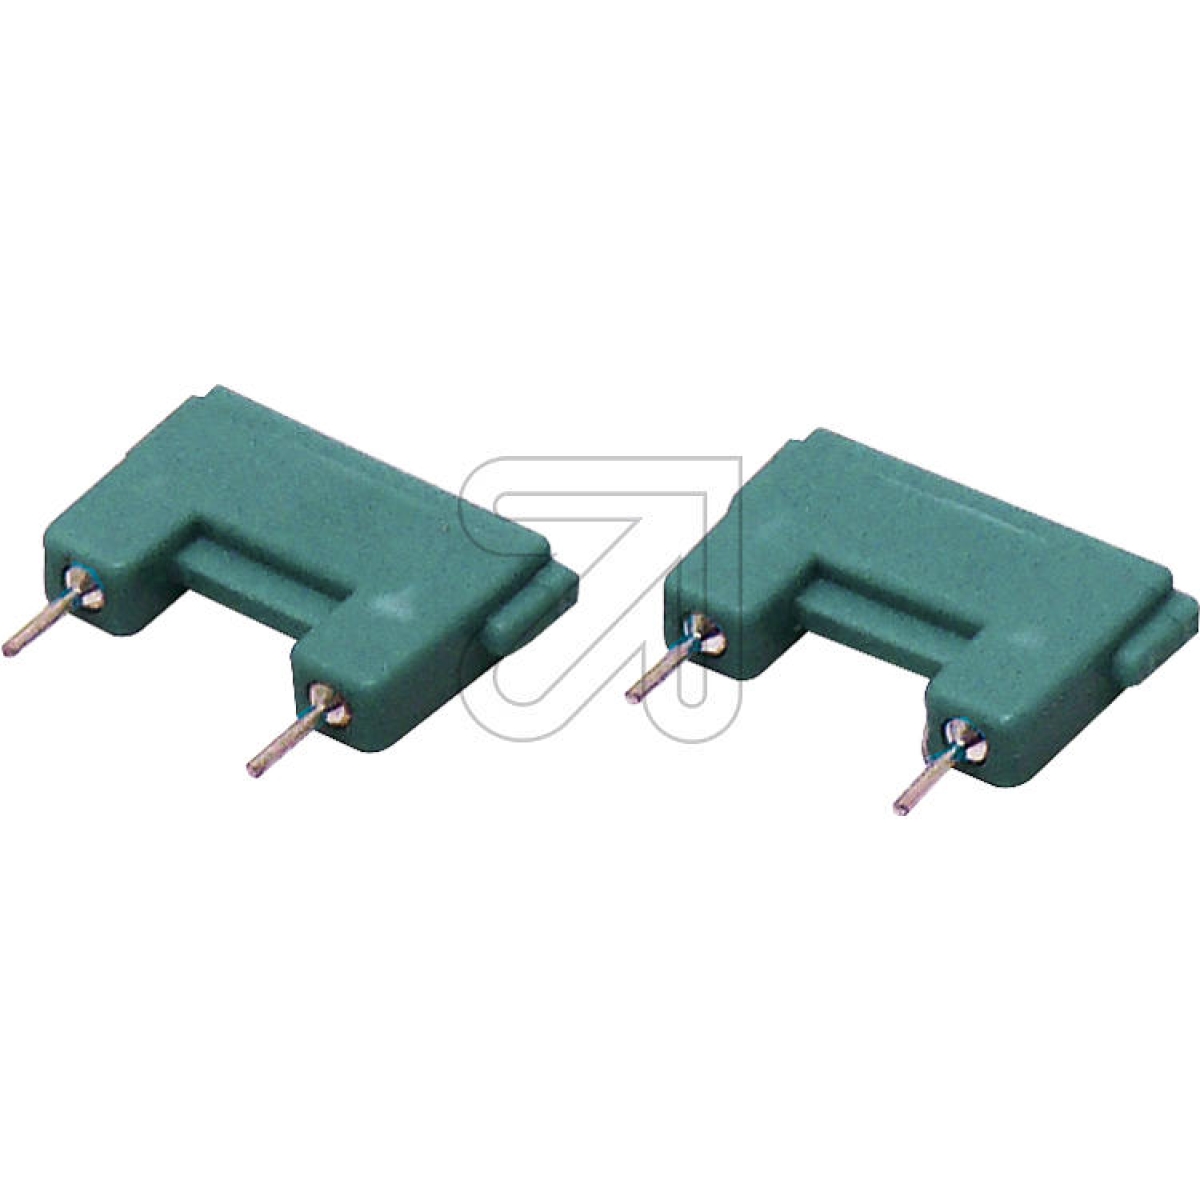 bticinoConfigurator 2 3501/2 (1 pack = 10 pieces) (2-wire technology)-Price for 10 pcs.